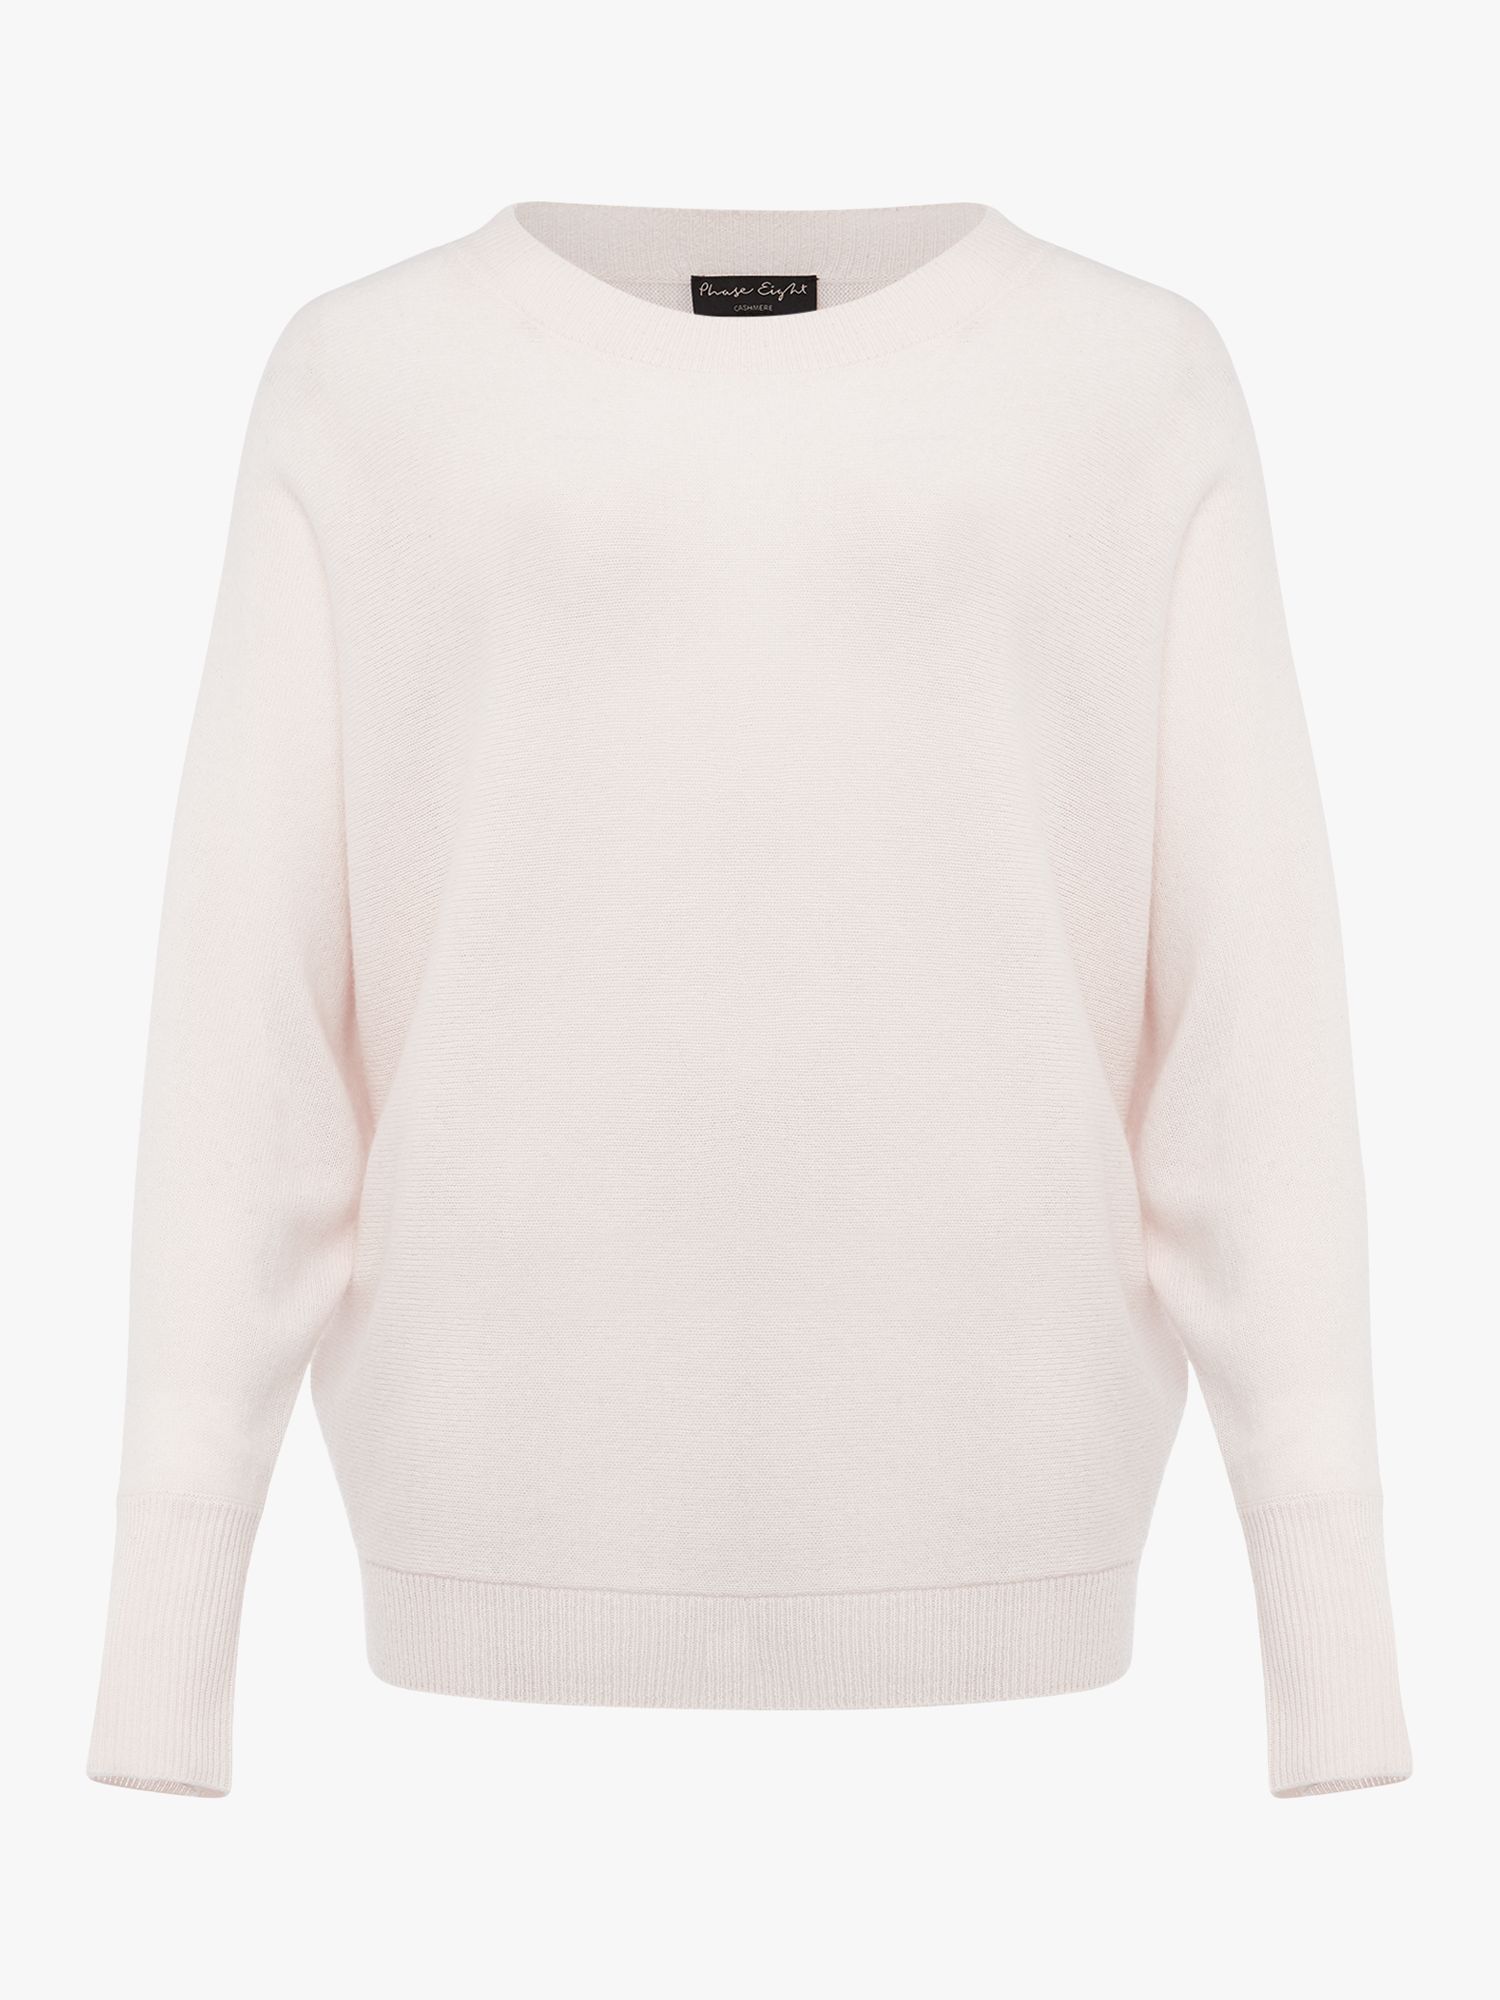 Phase Eight Beatrice Cashmere Jumper, Pale Pink, XS